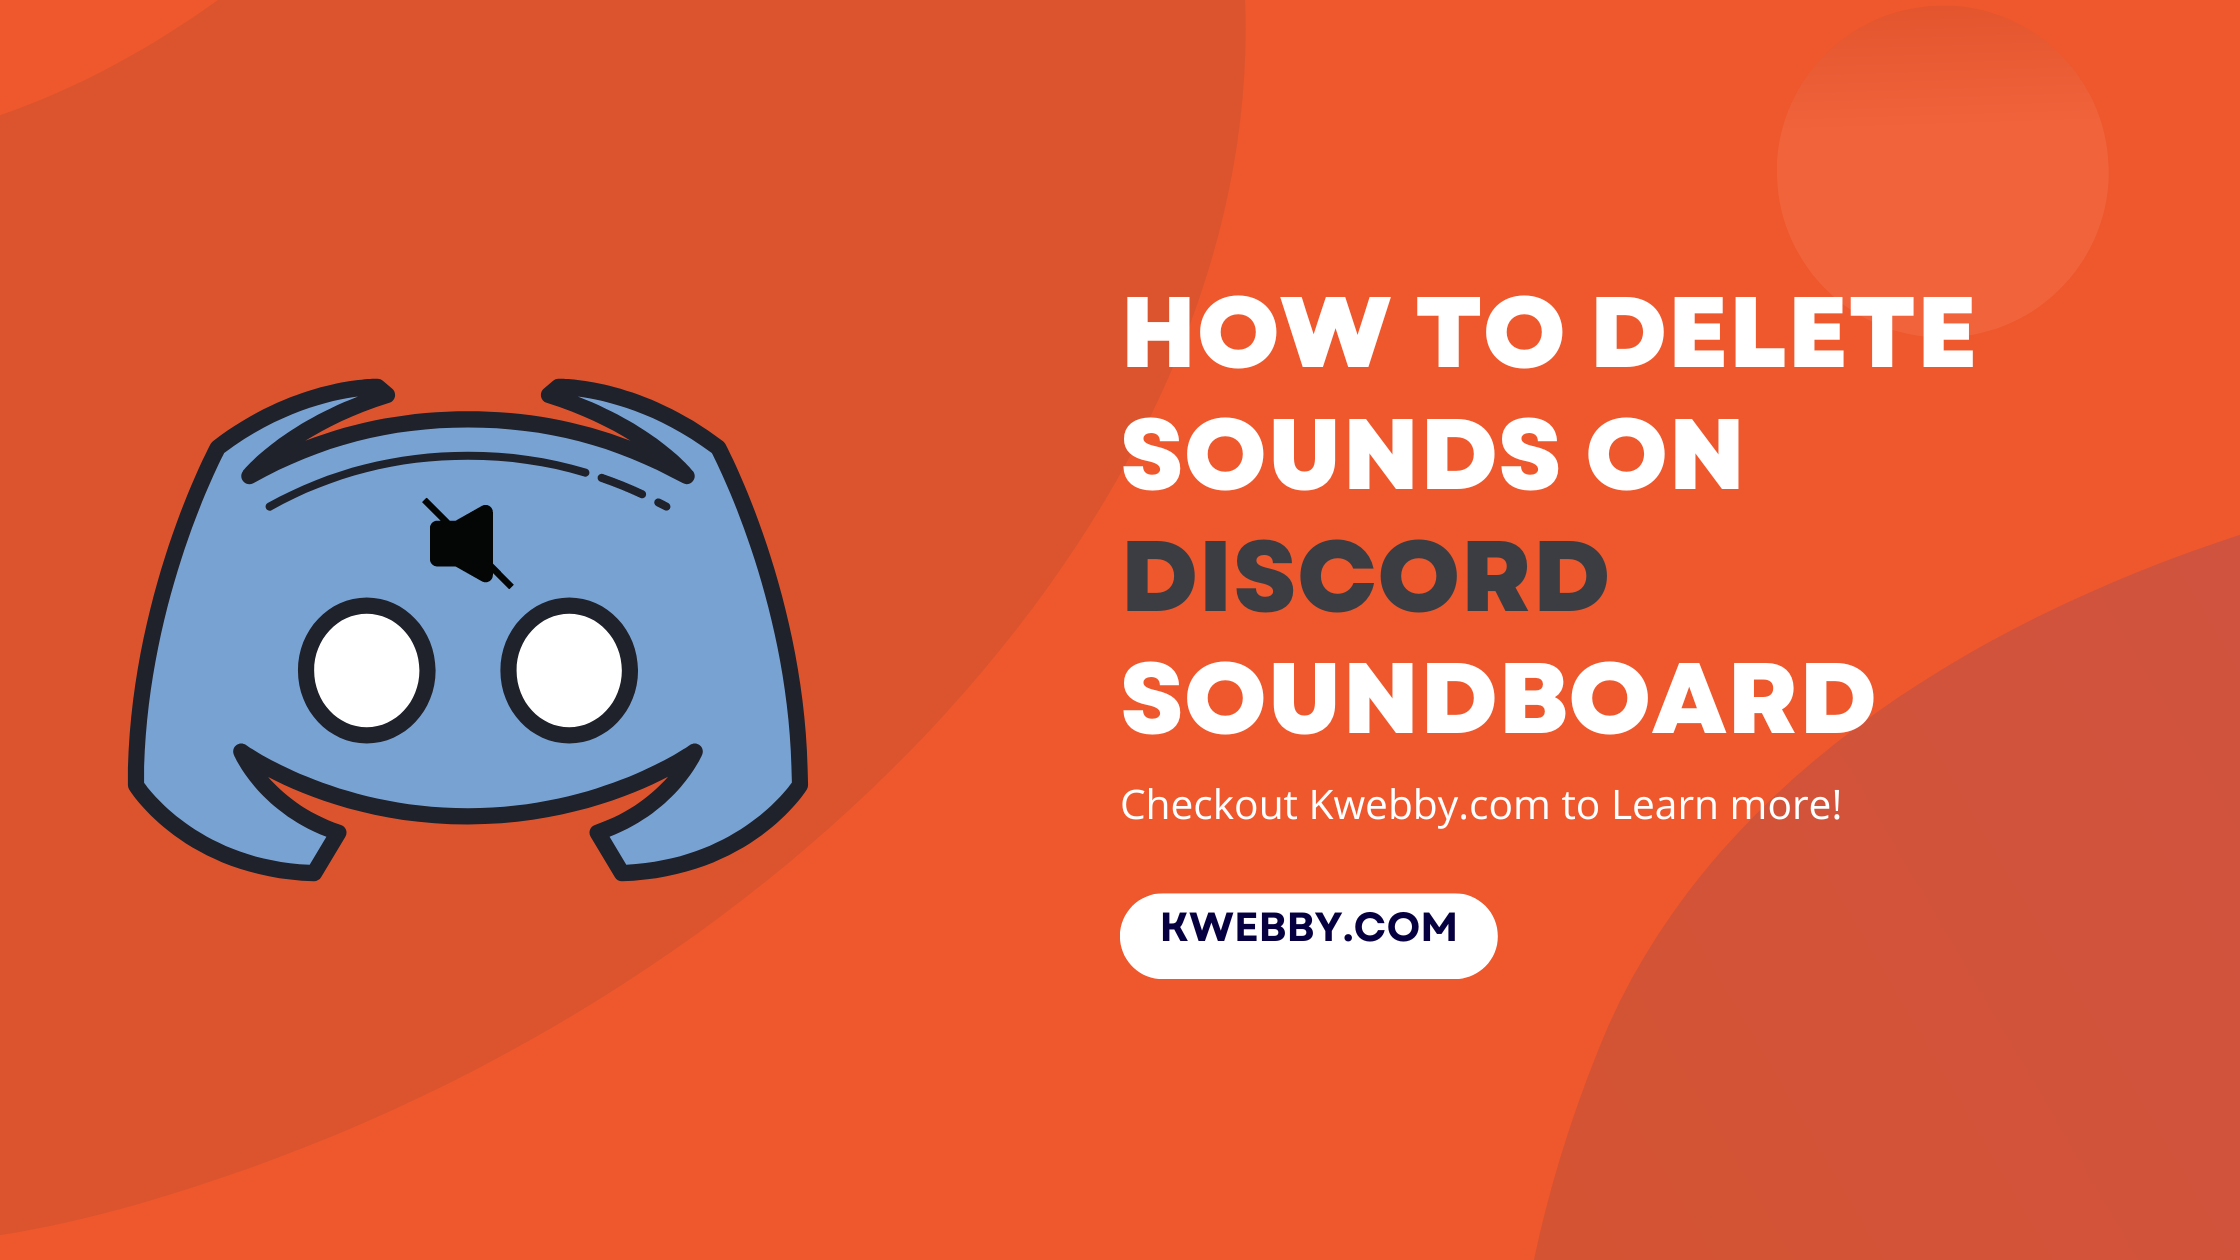 How to delete sounds on Discord soundboard in a few Steps